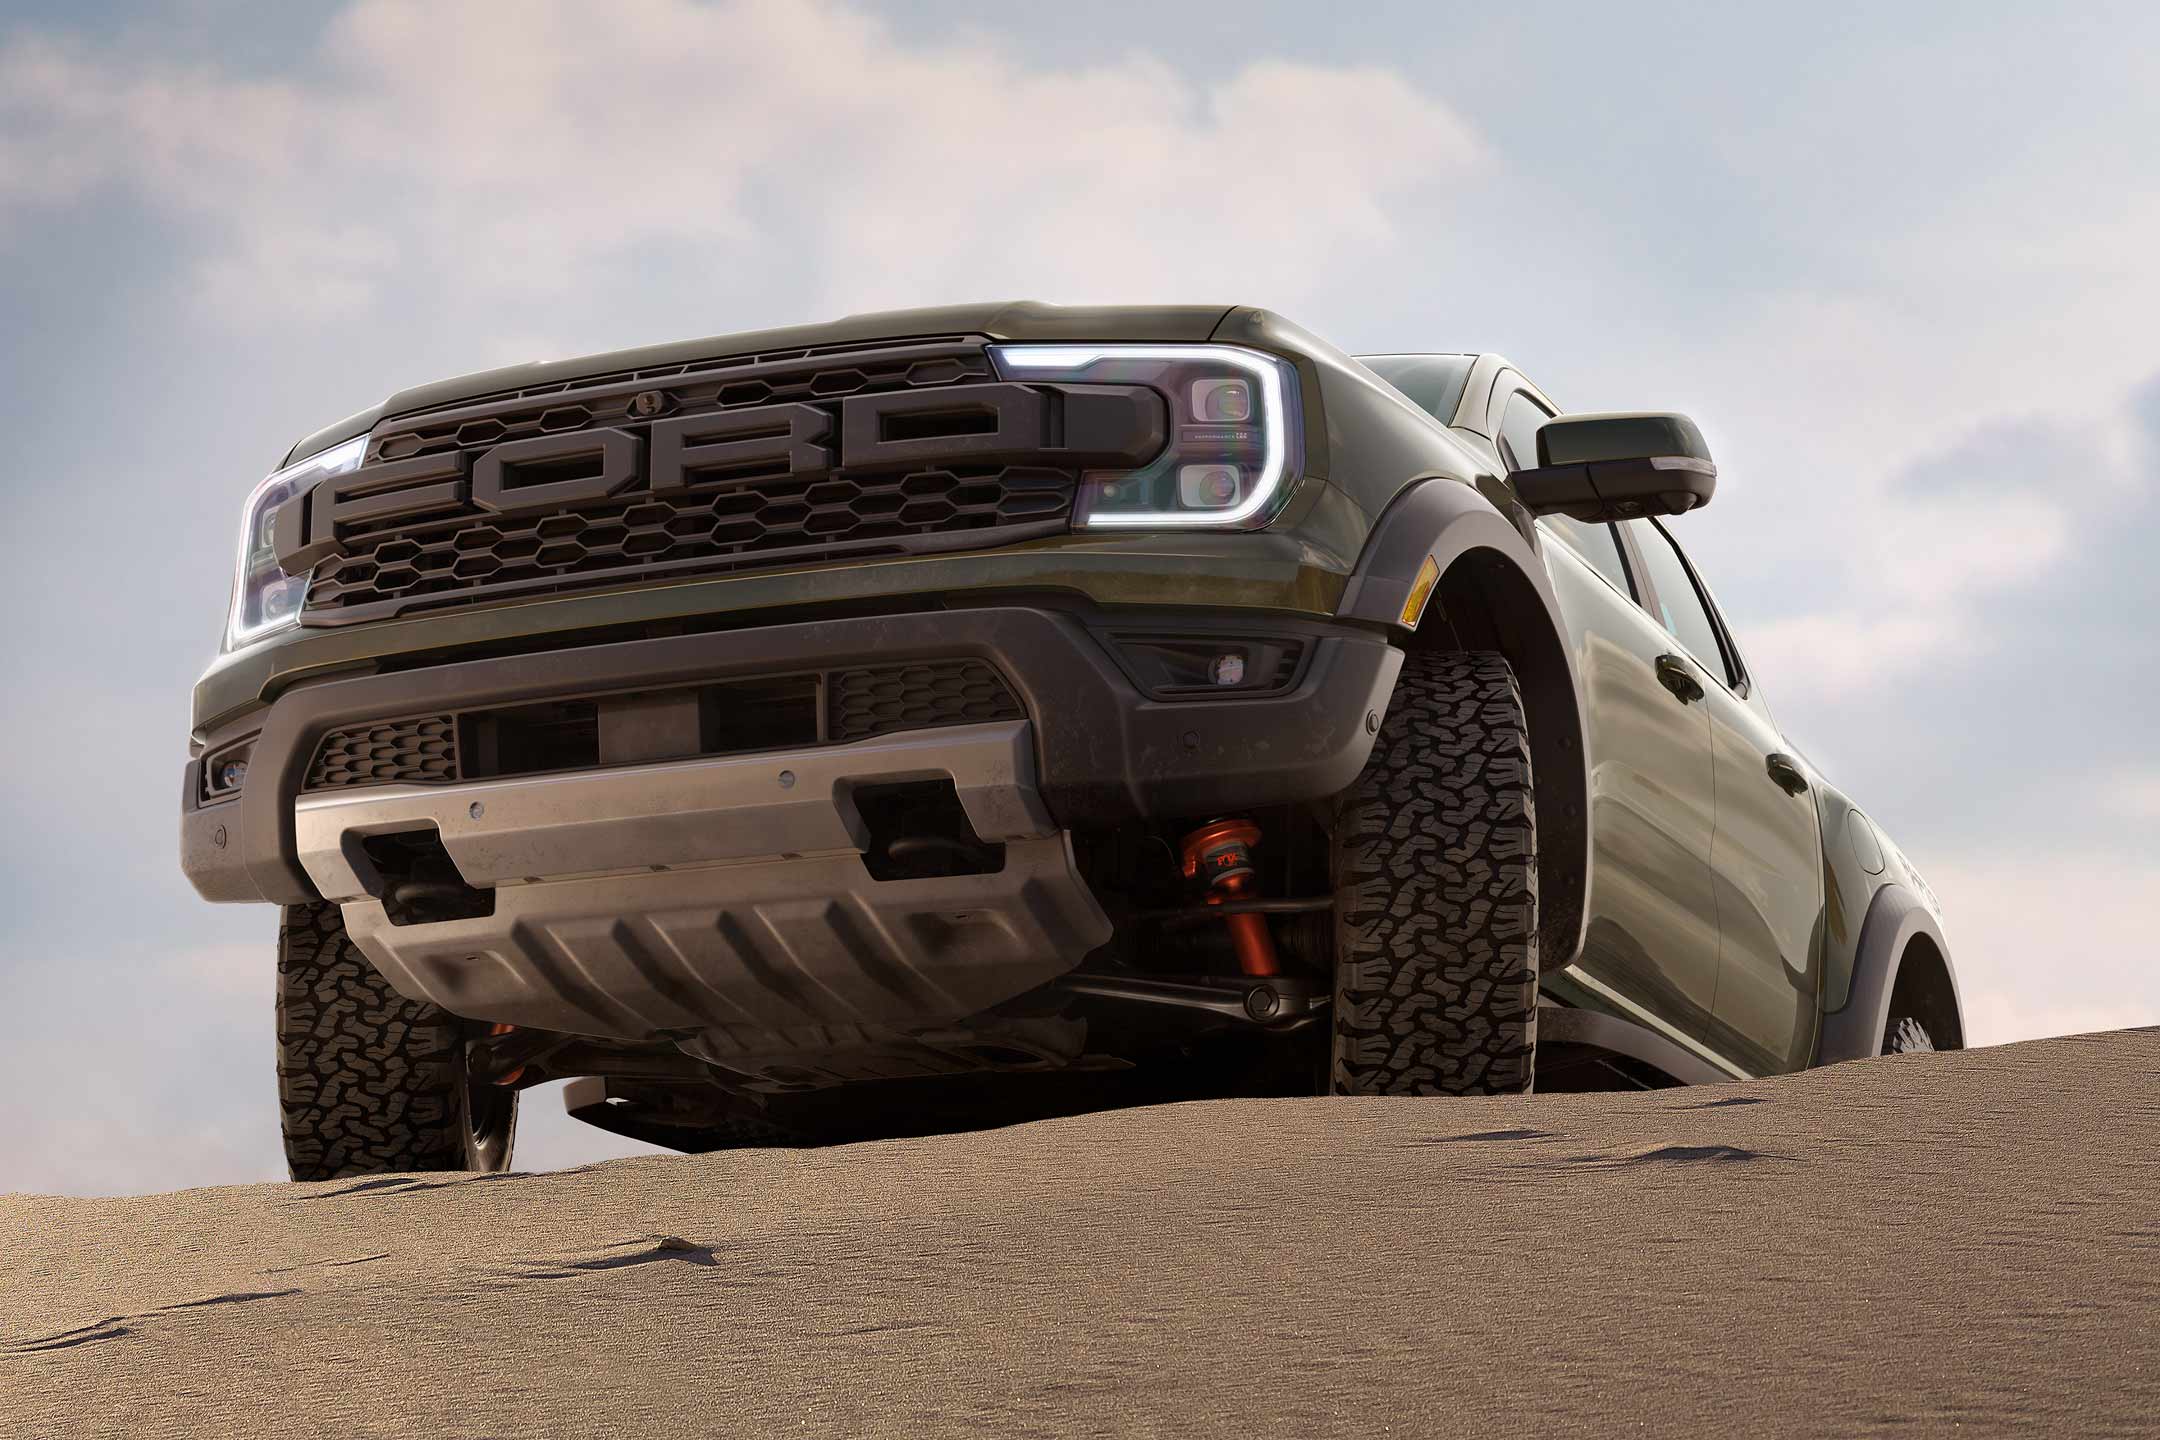 Customized Ford Ranger By Carlex Design Looks Ready To Go Off-Road